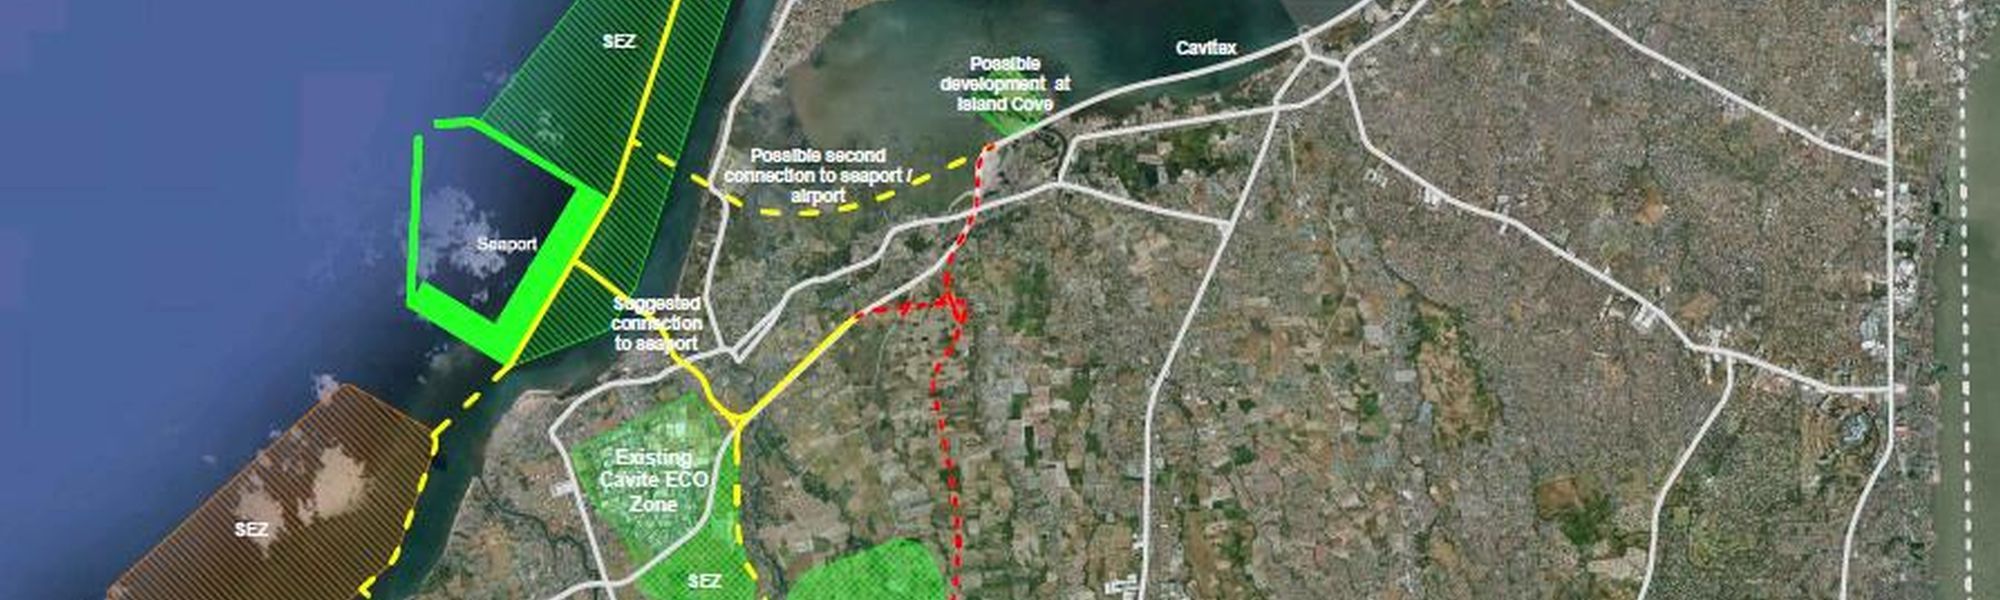 Update of the Feasibility Study for the Sangley Seaport and Airport Project